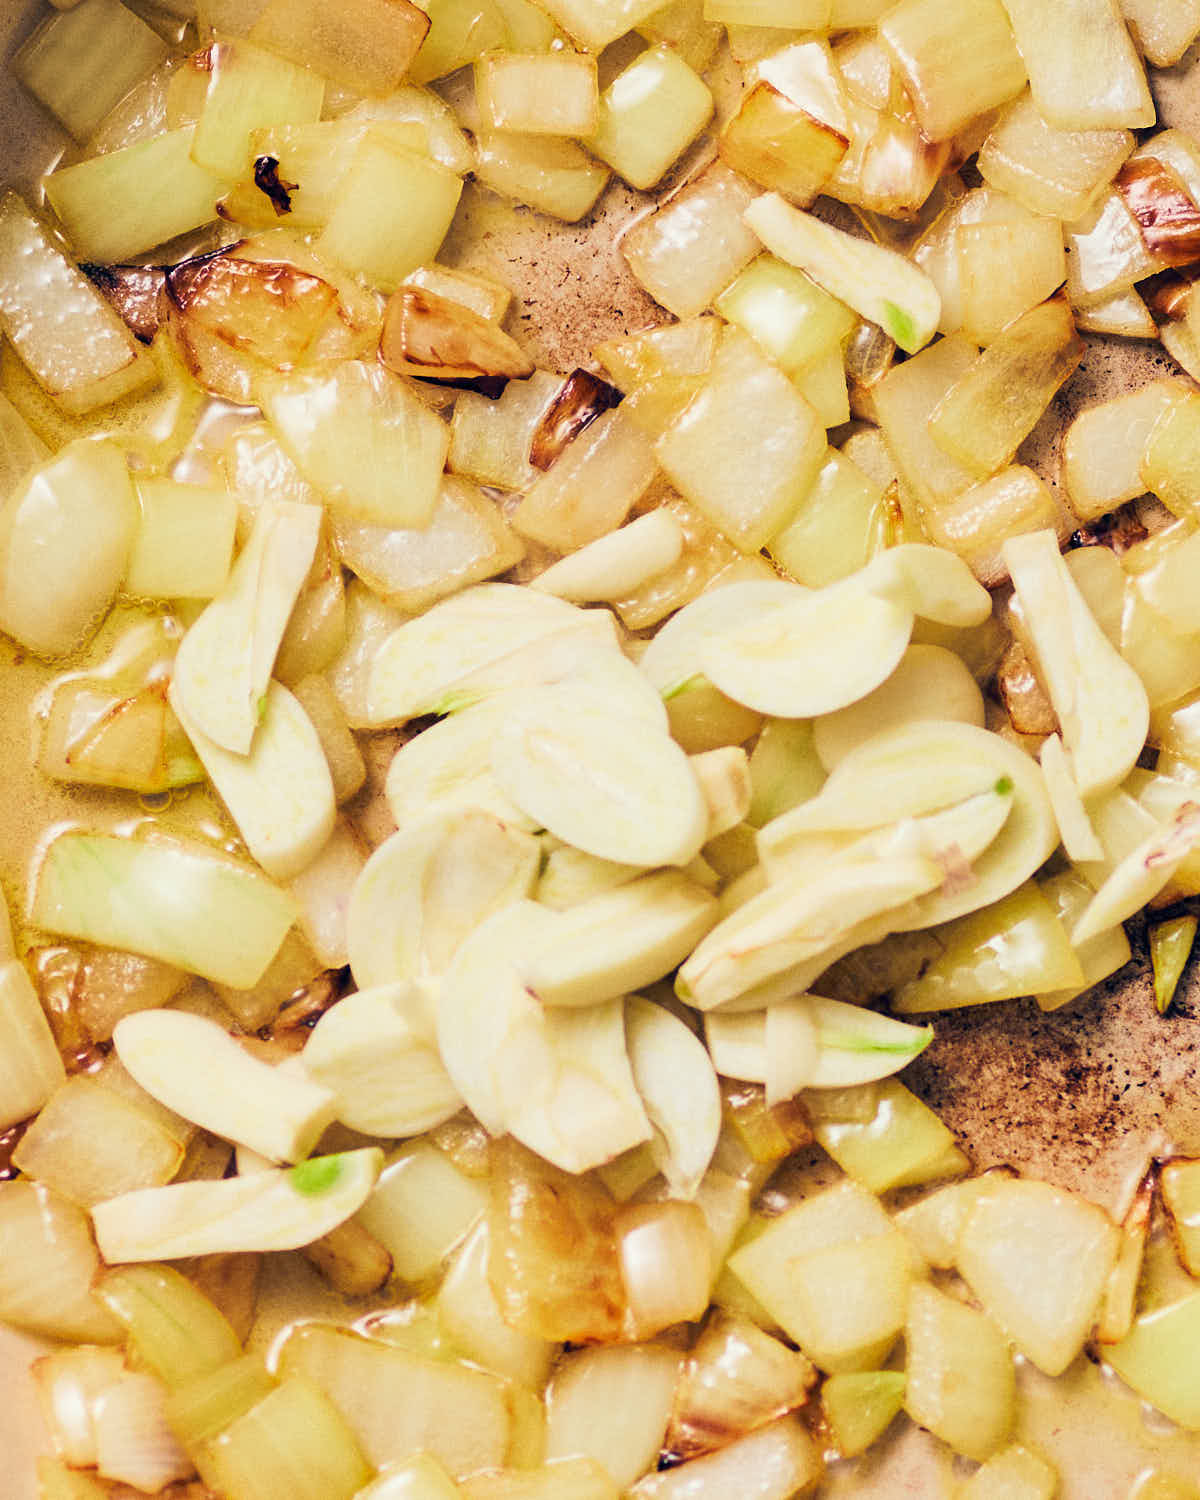 A pan of diced onions cooked until pale golden, with fresh sliced garlic cloves